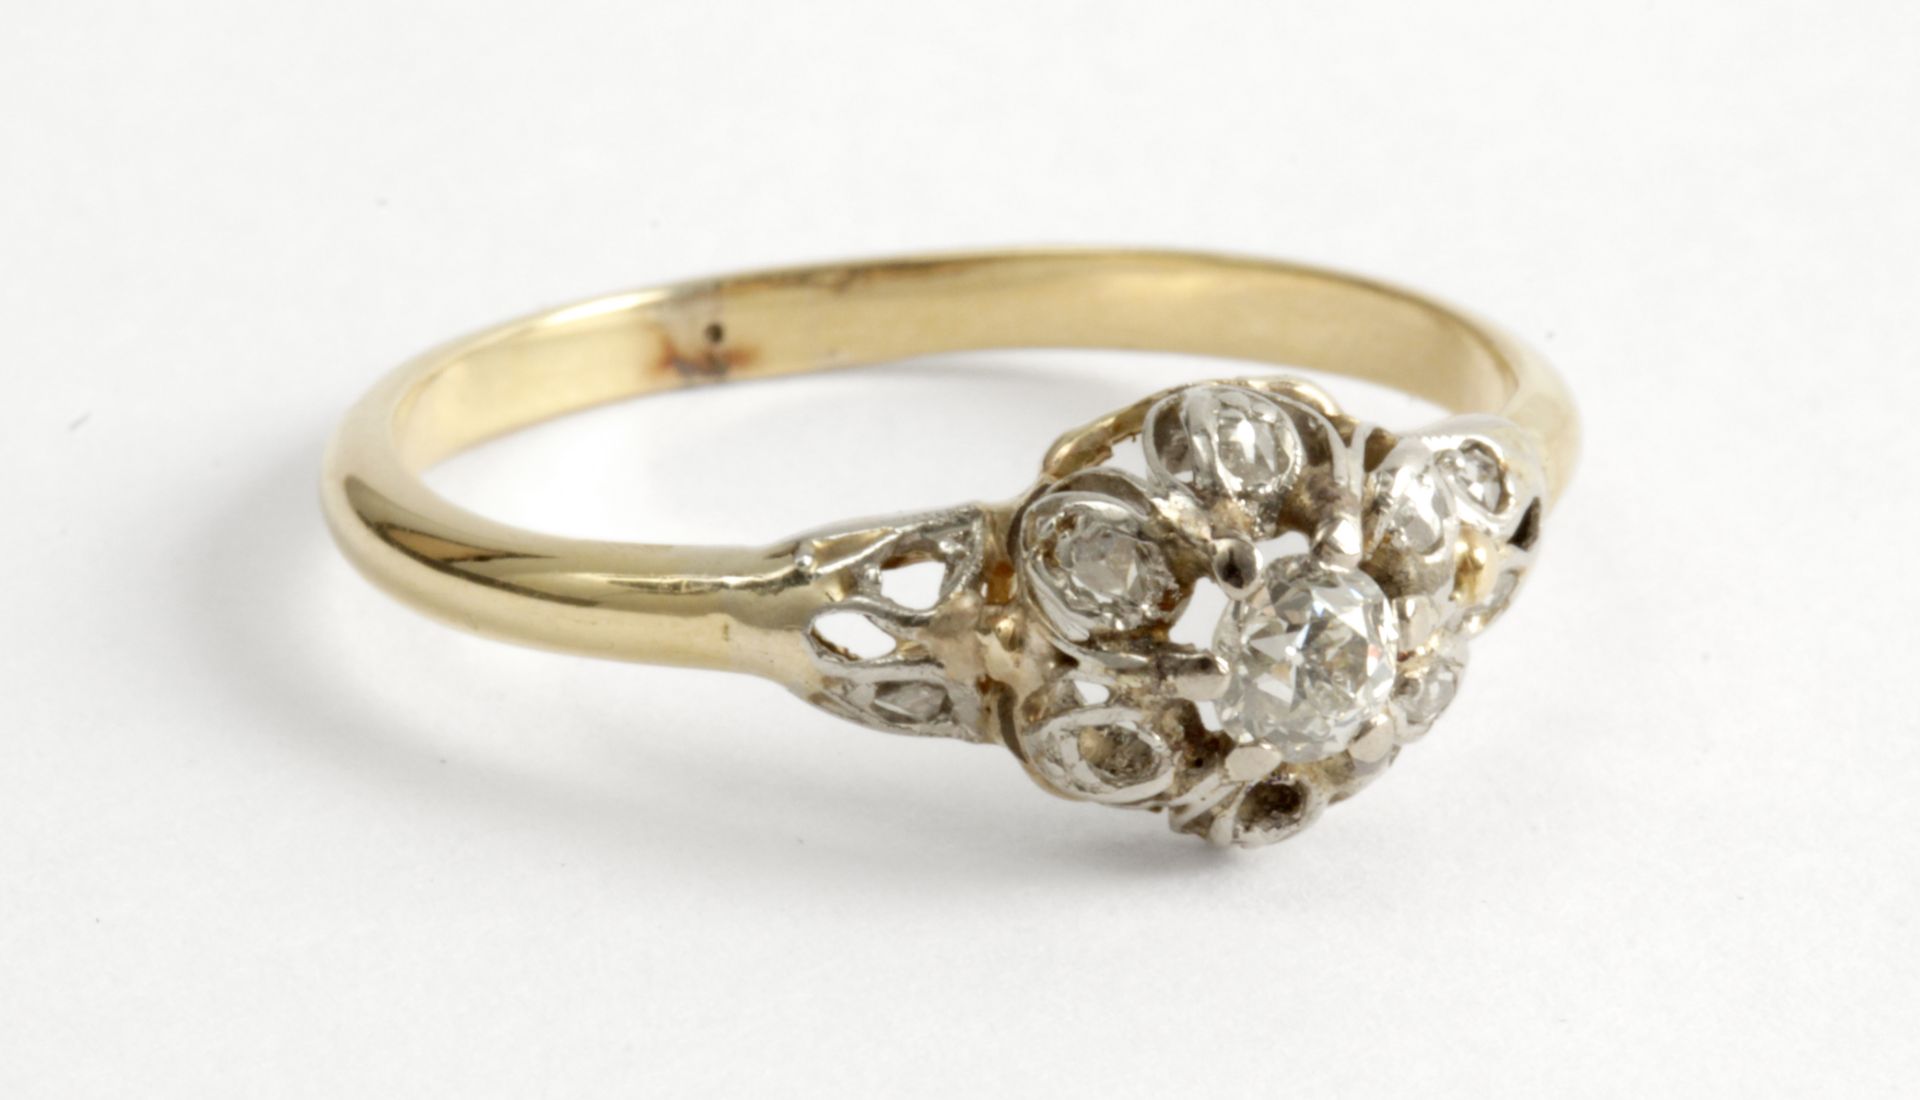 A first half of 20th century diamond ring with an 18 k. yellow gold setting - Image 2 of 3